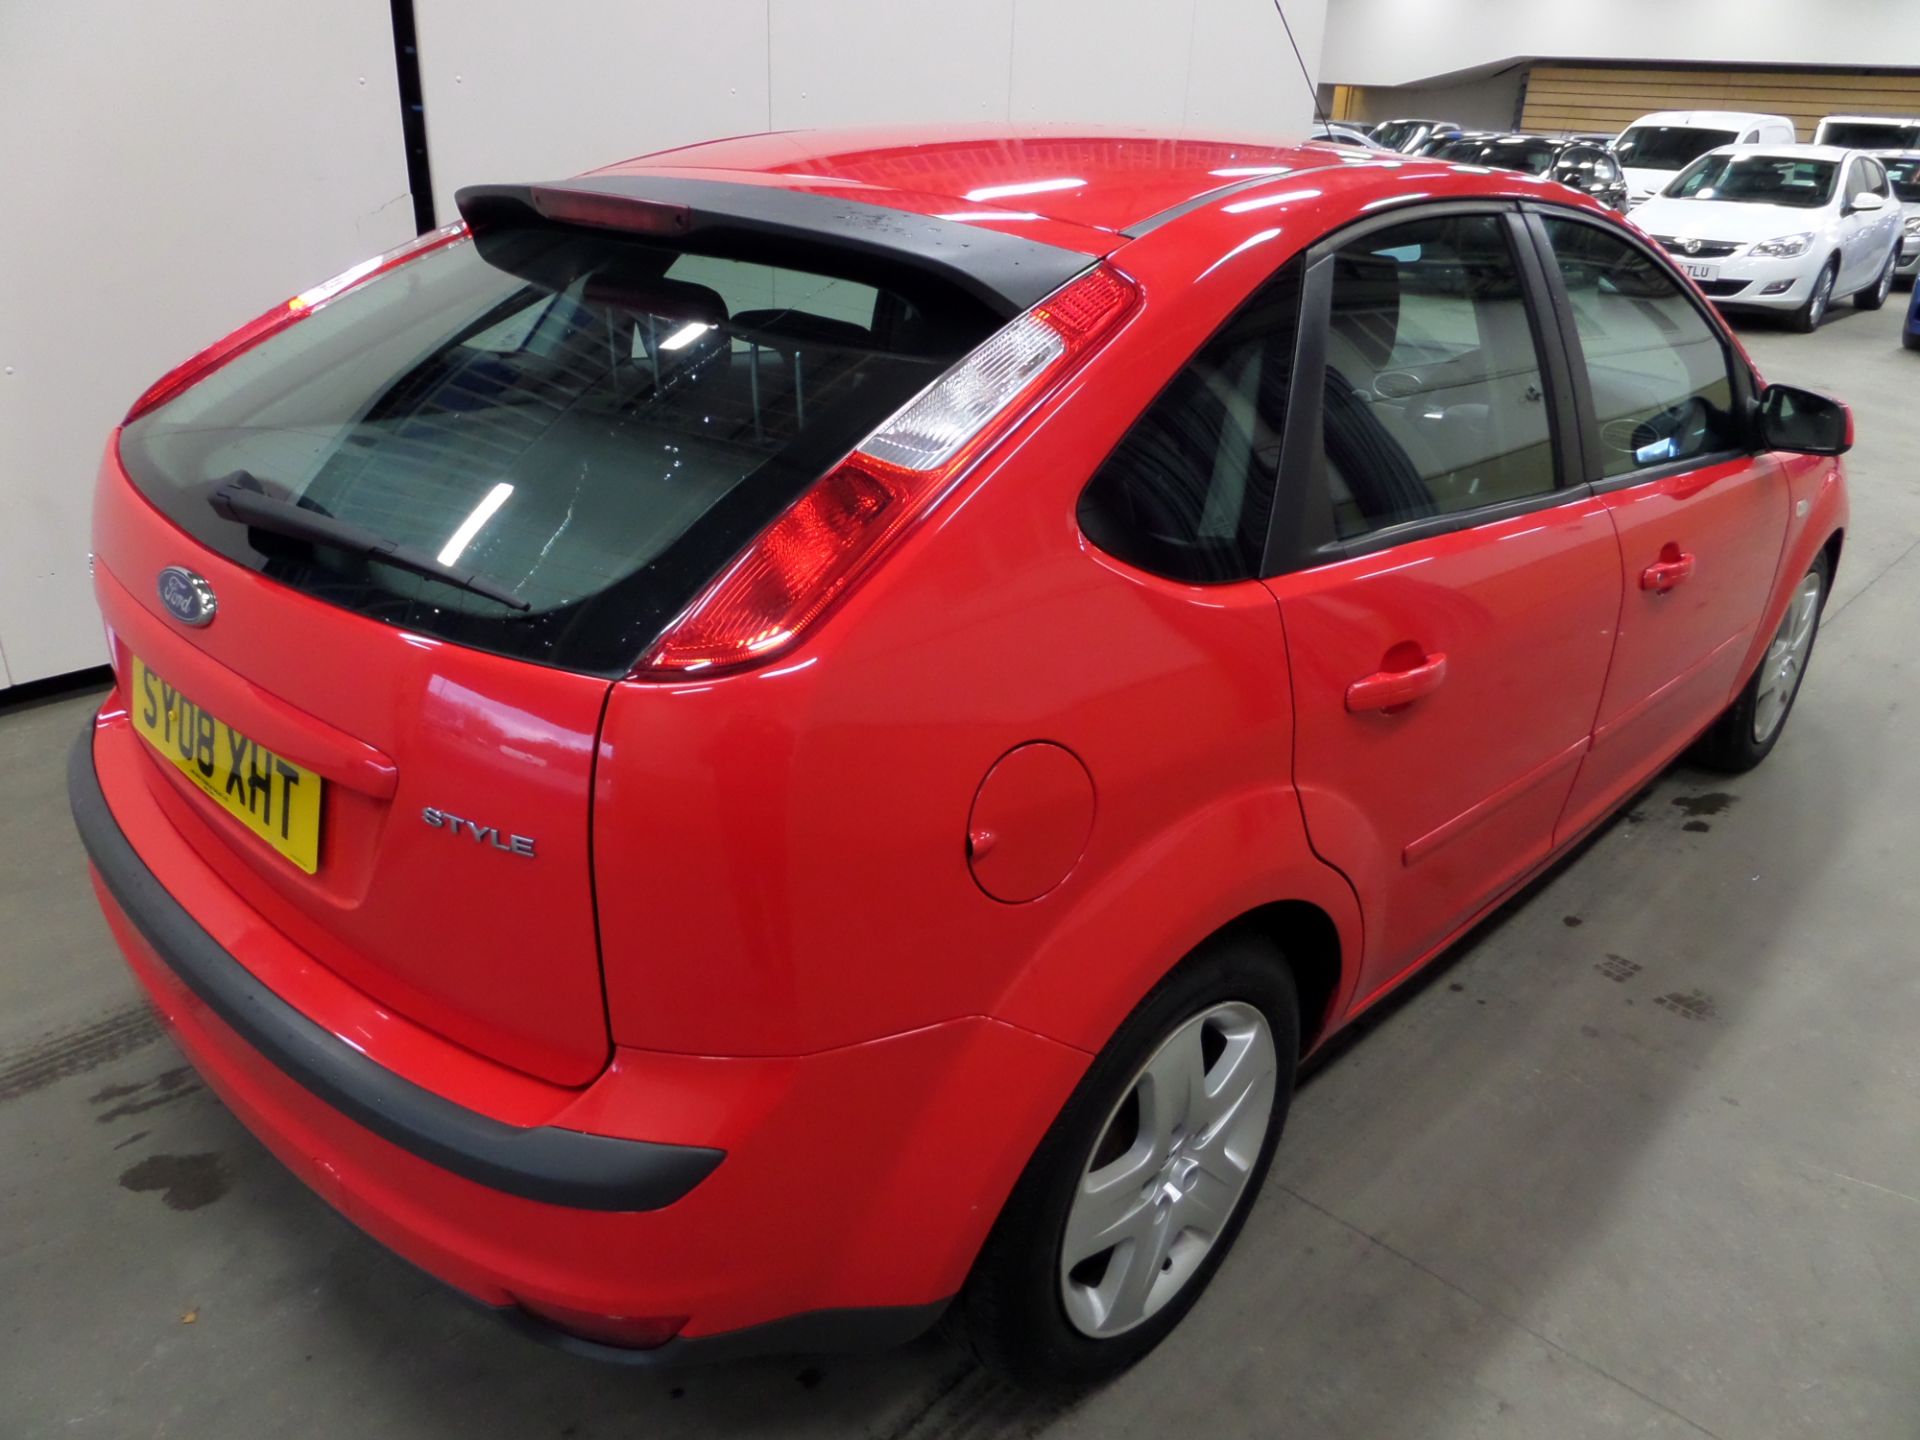 Ford Focus Style - 1596cc 5 Door - Image 6 of 9